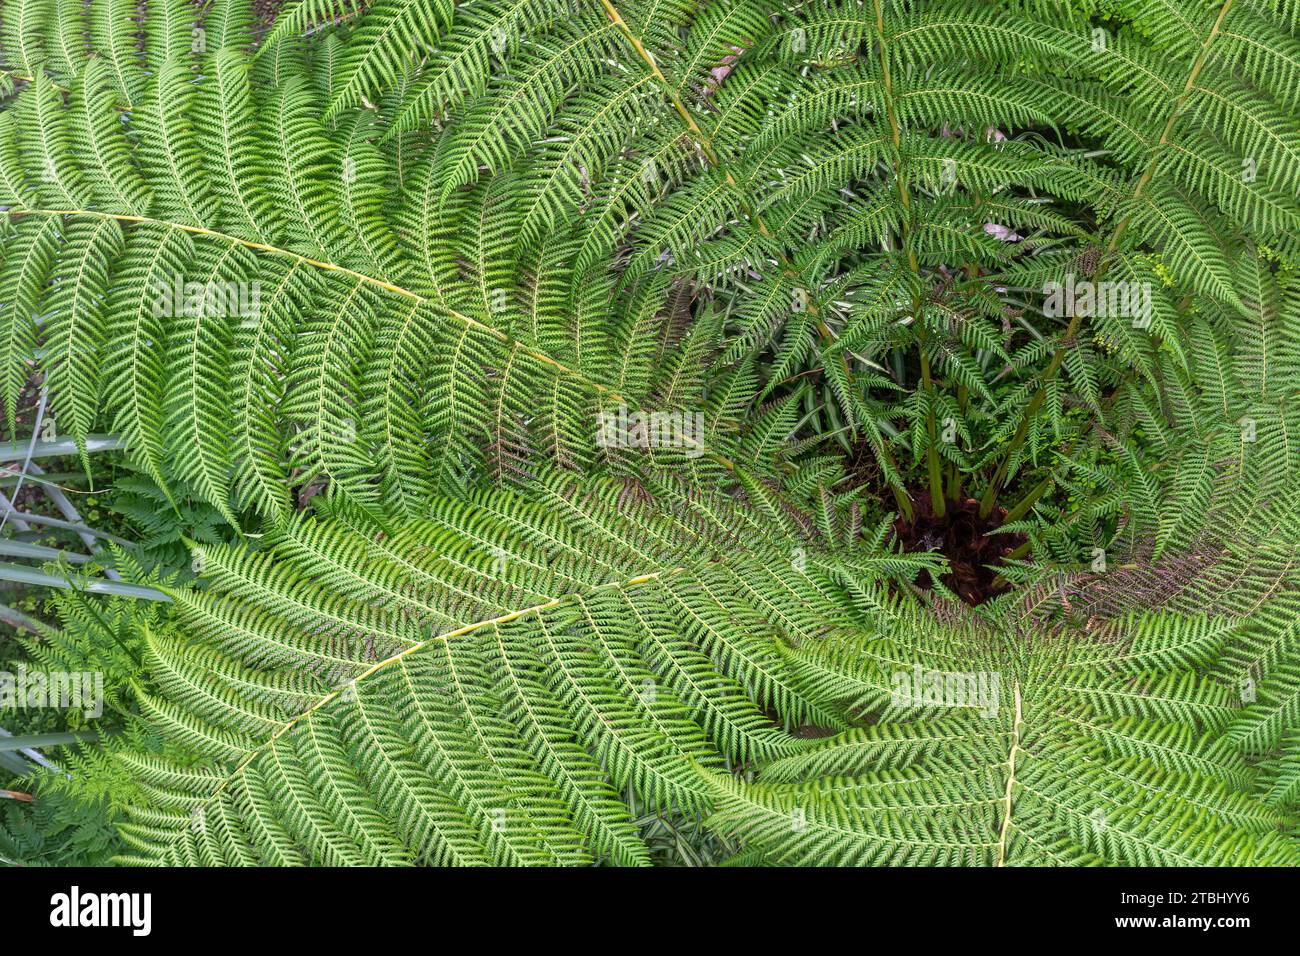 Green fronds of a tree fern plant viewed from above Stock Photo